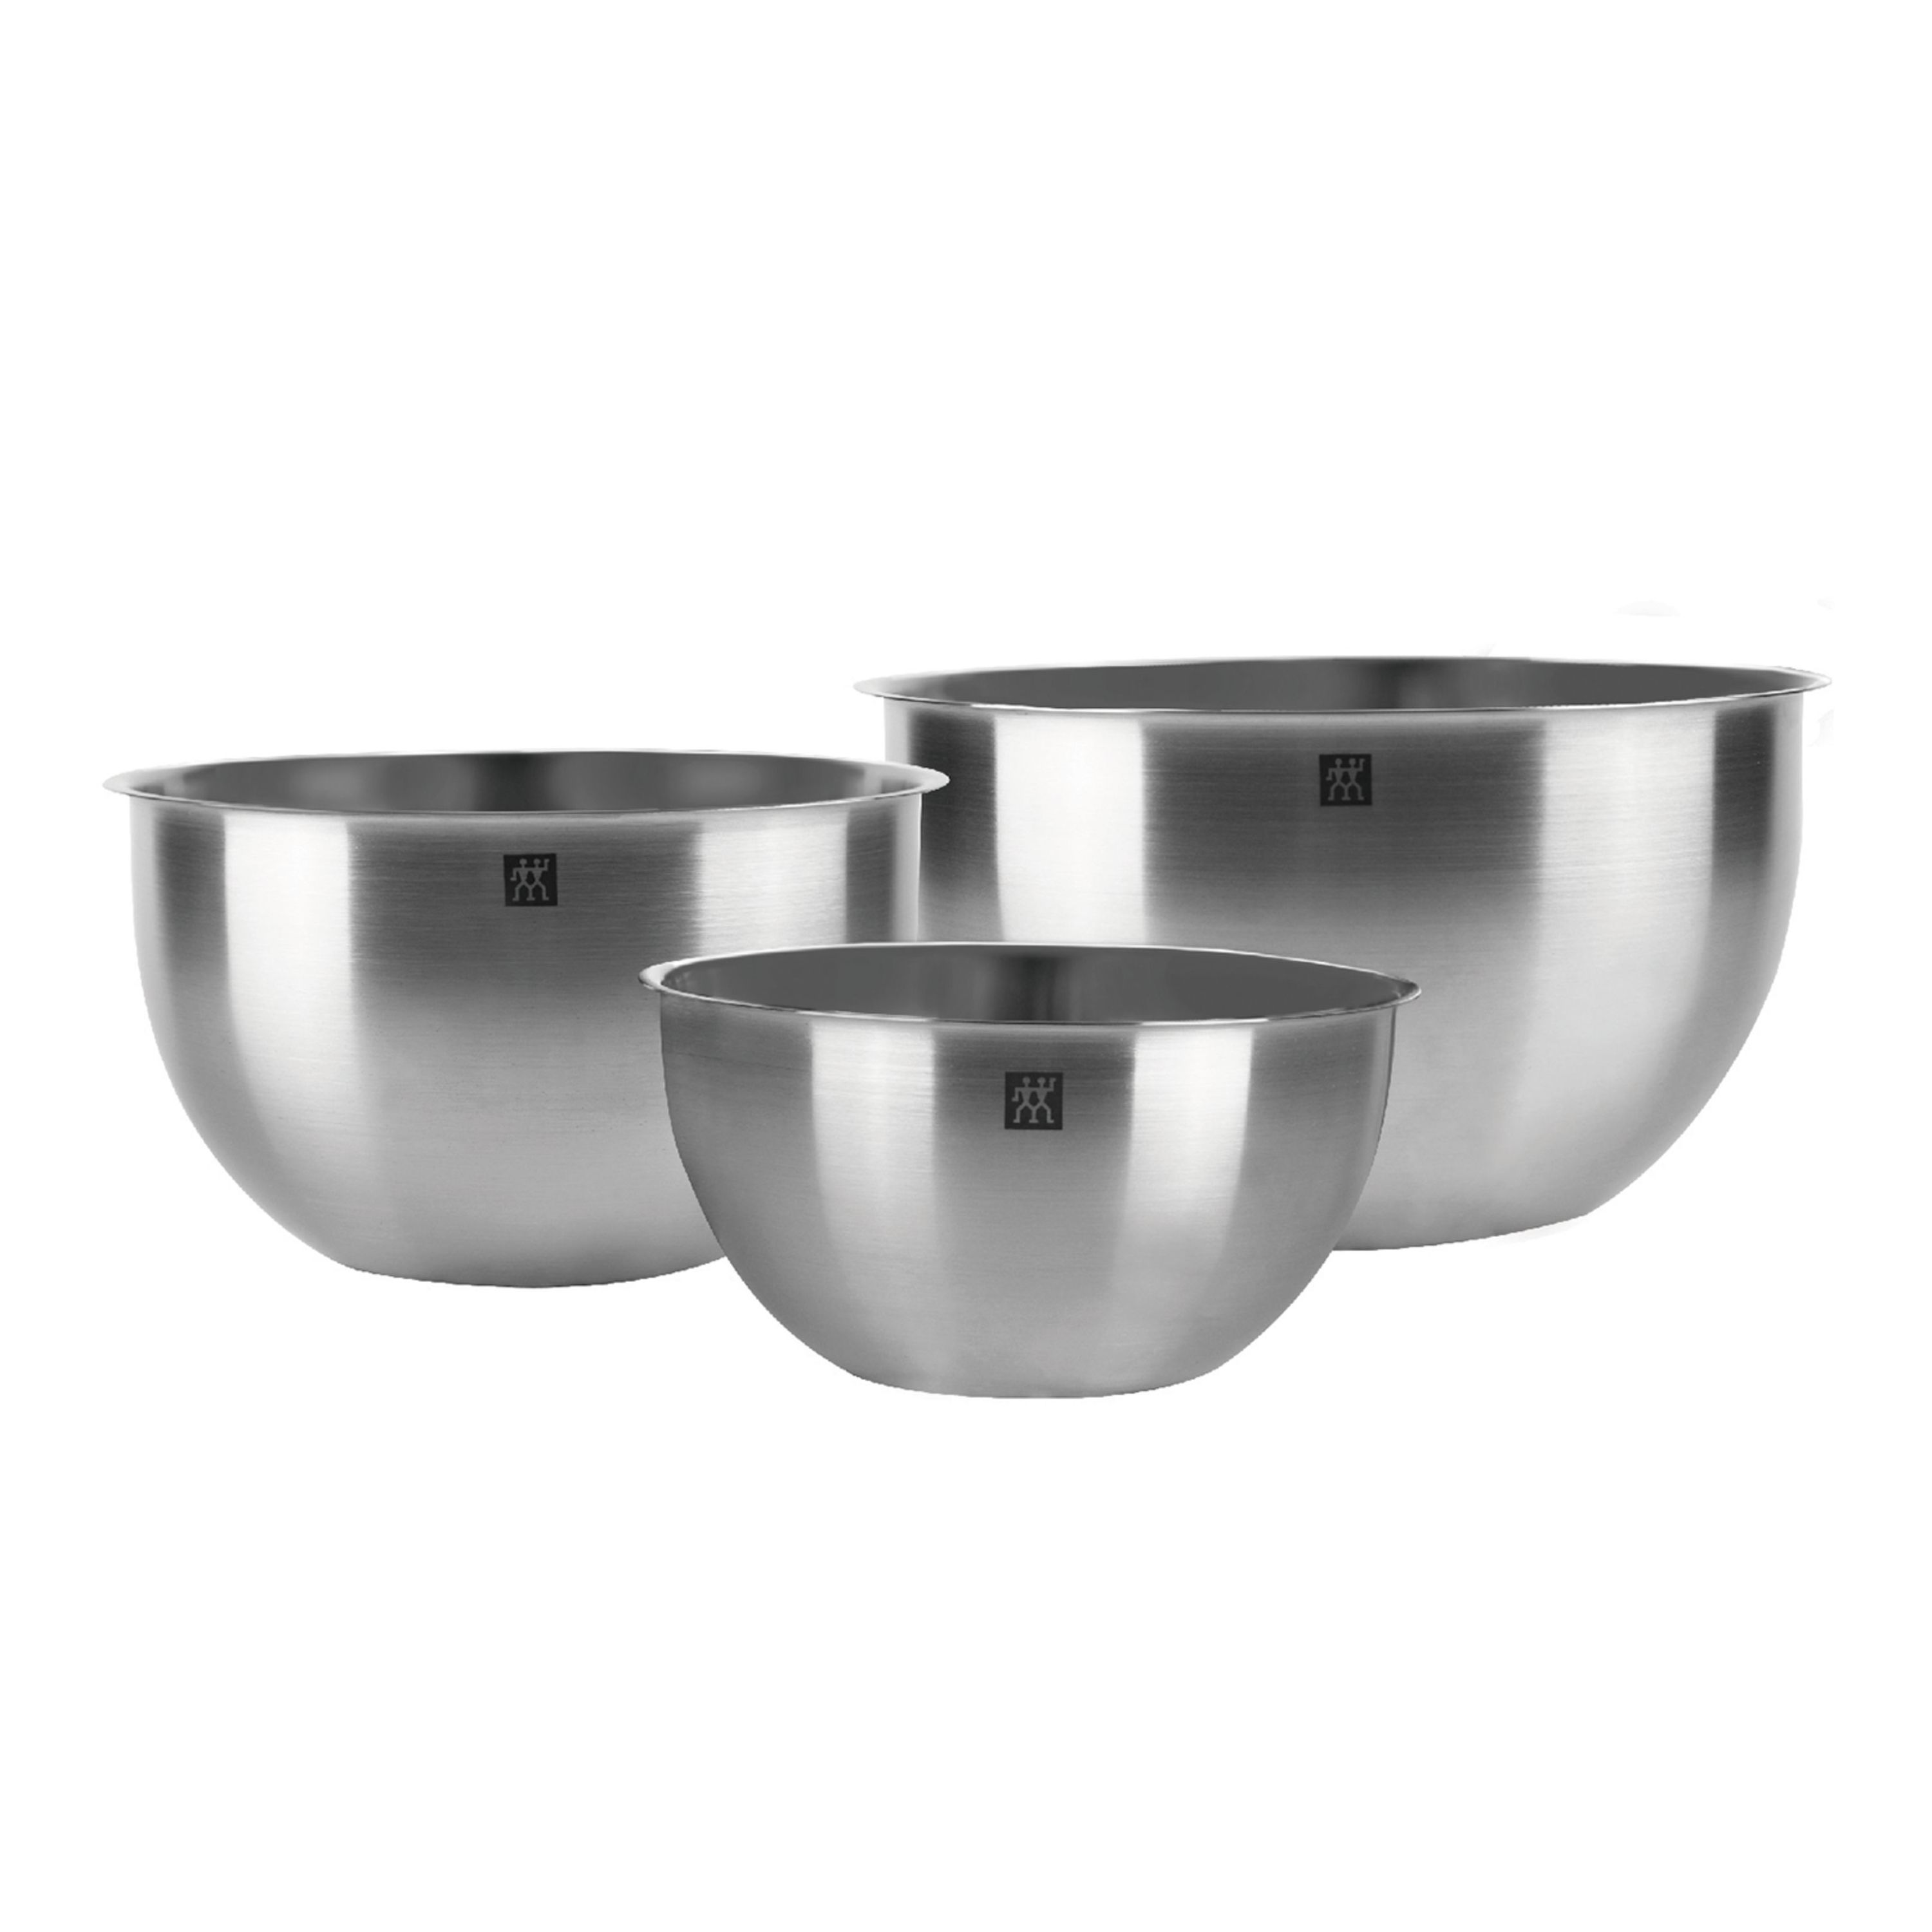 https://www.zwilling.com/on/demandware.static/-/Sites-zwilling-master-catalog/default/dwa219e4aa/images/large/40202-005_1.jpg